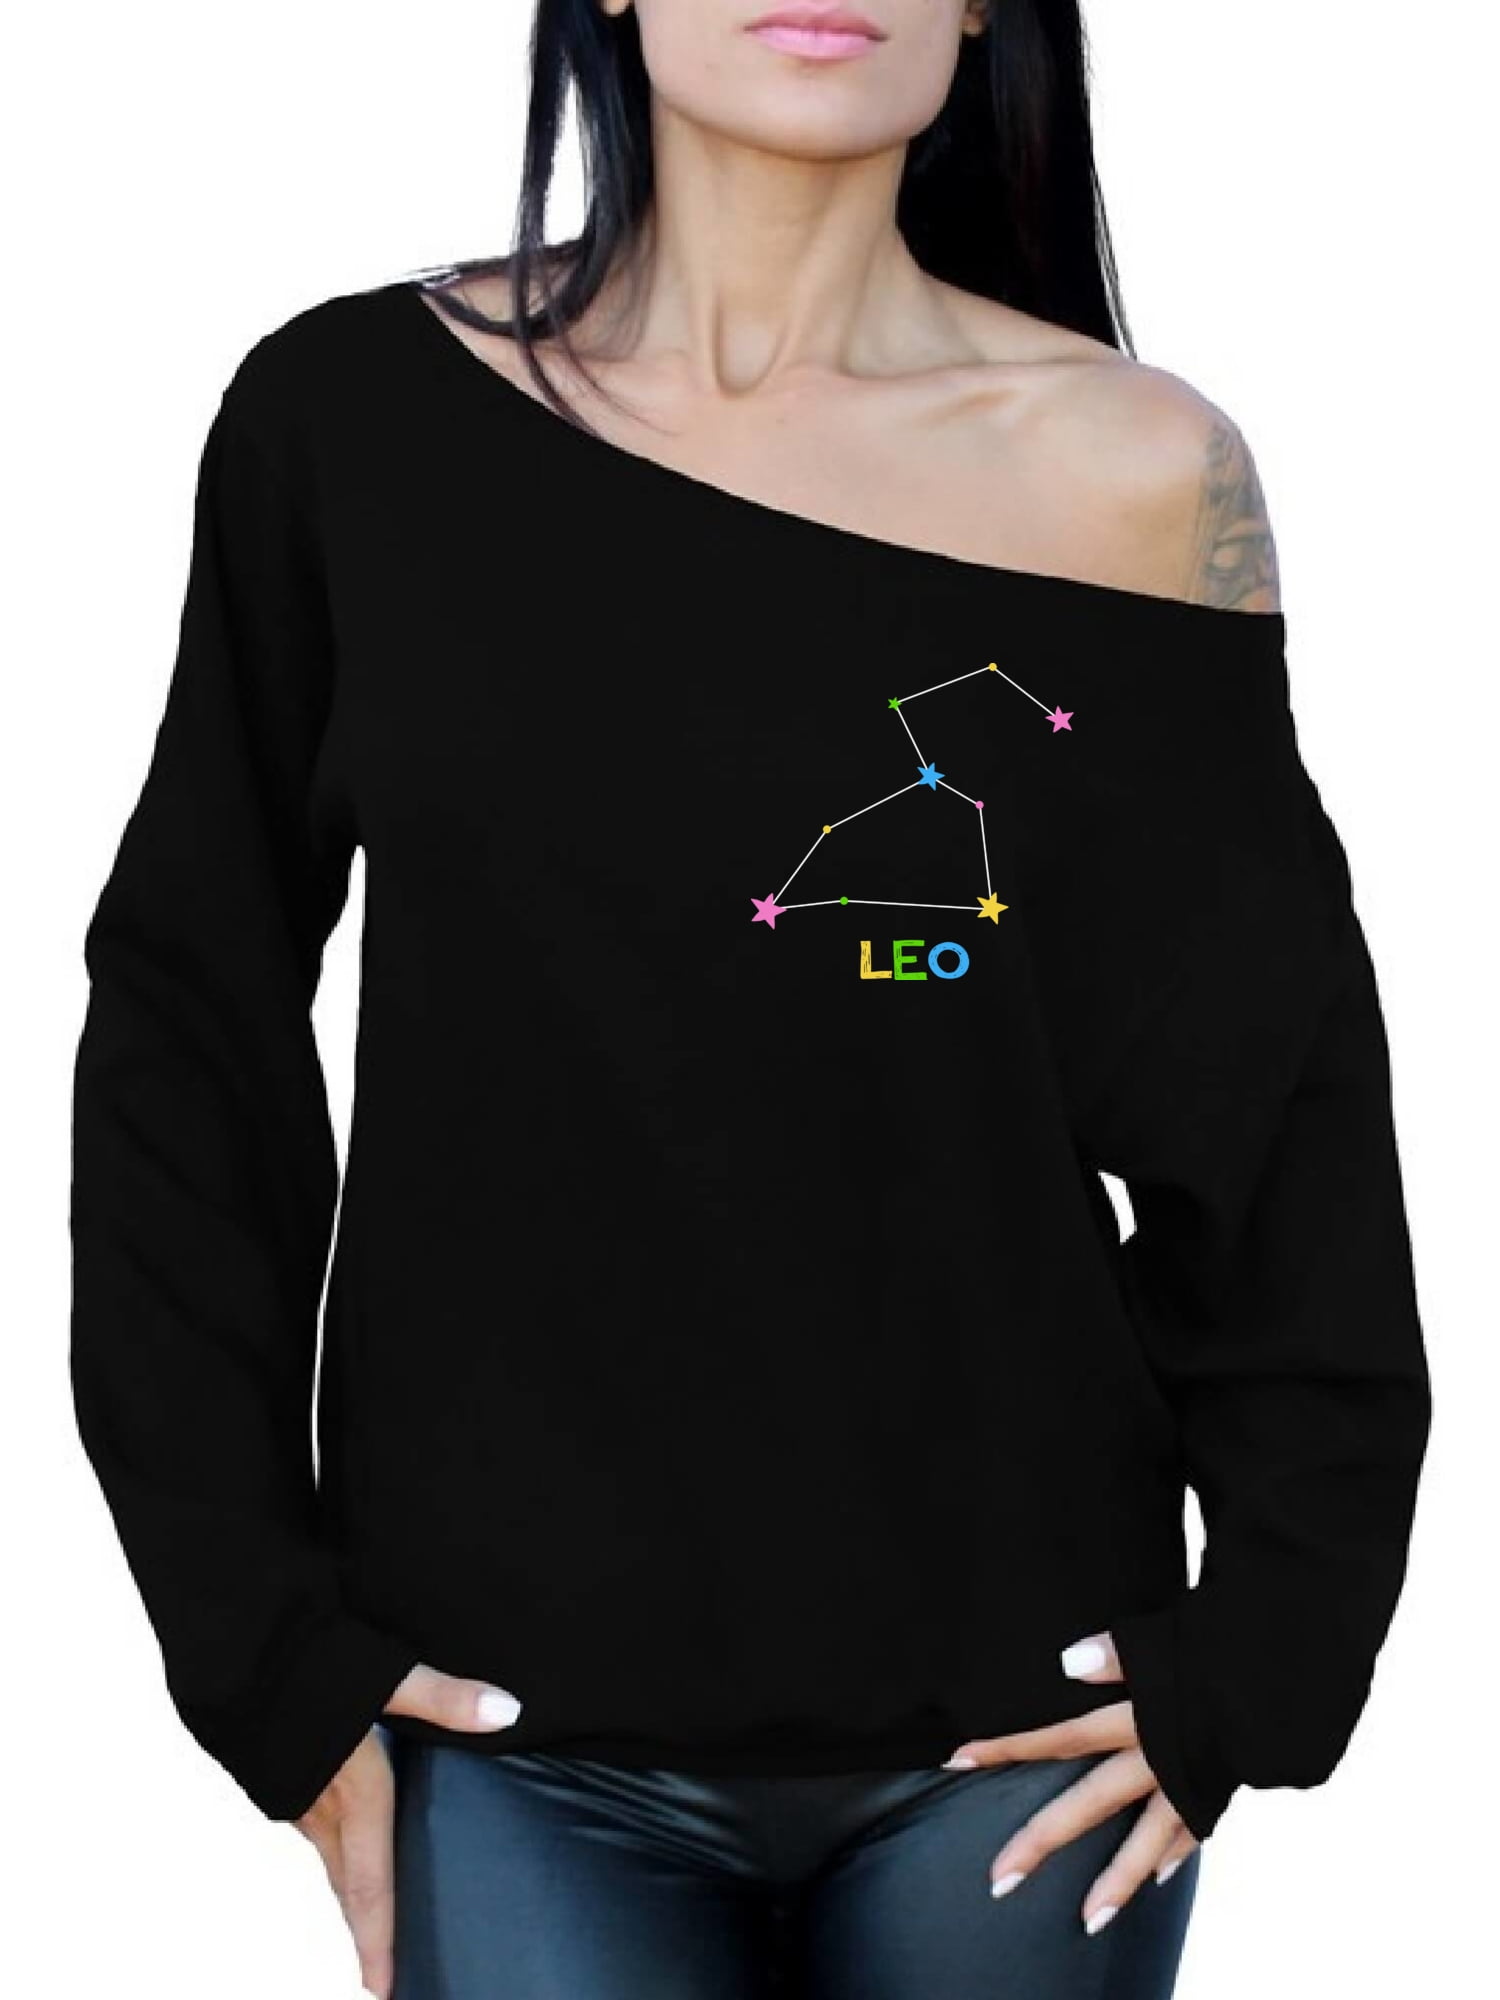 Off the Shoulder Tops Leo Shirts for Women Zodiac Birthday Gifts